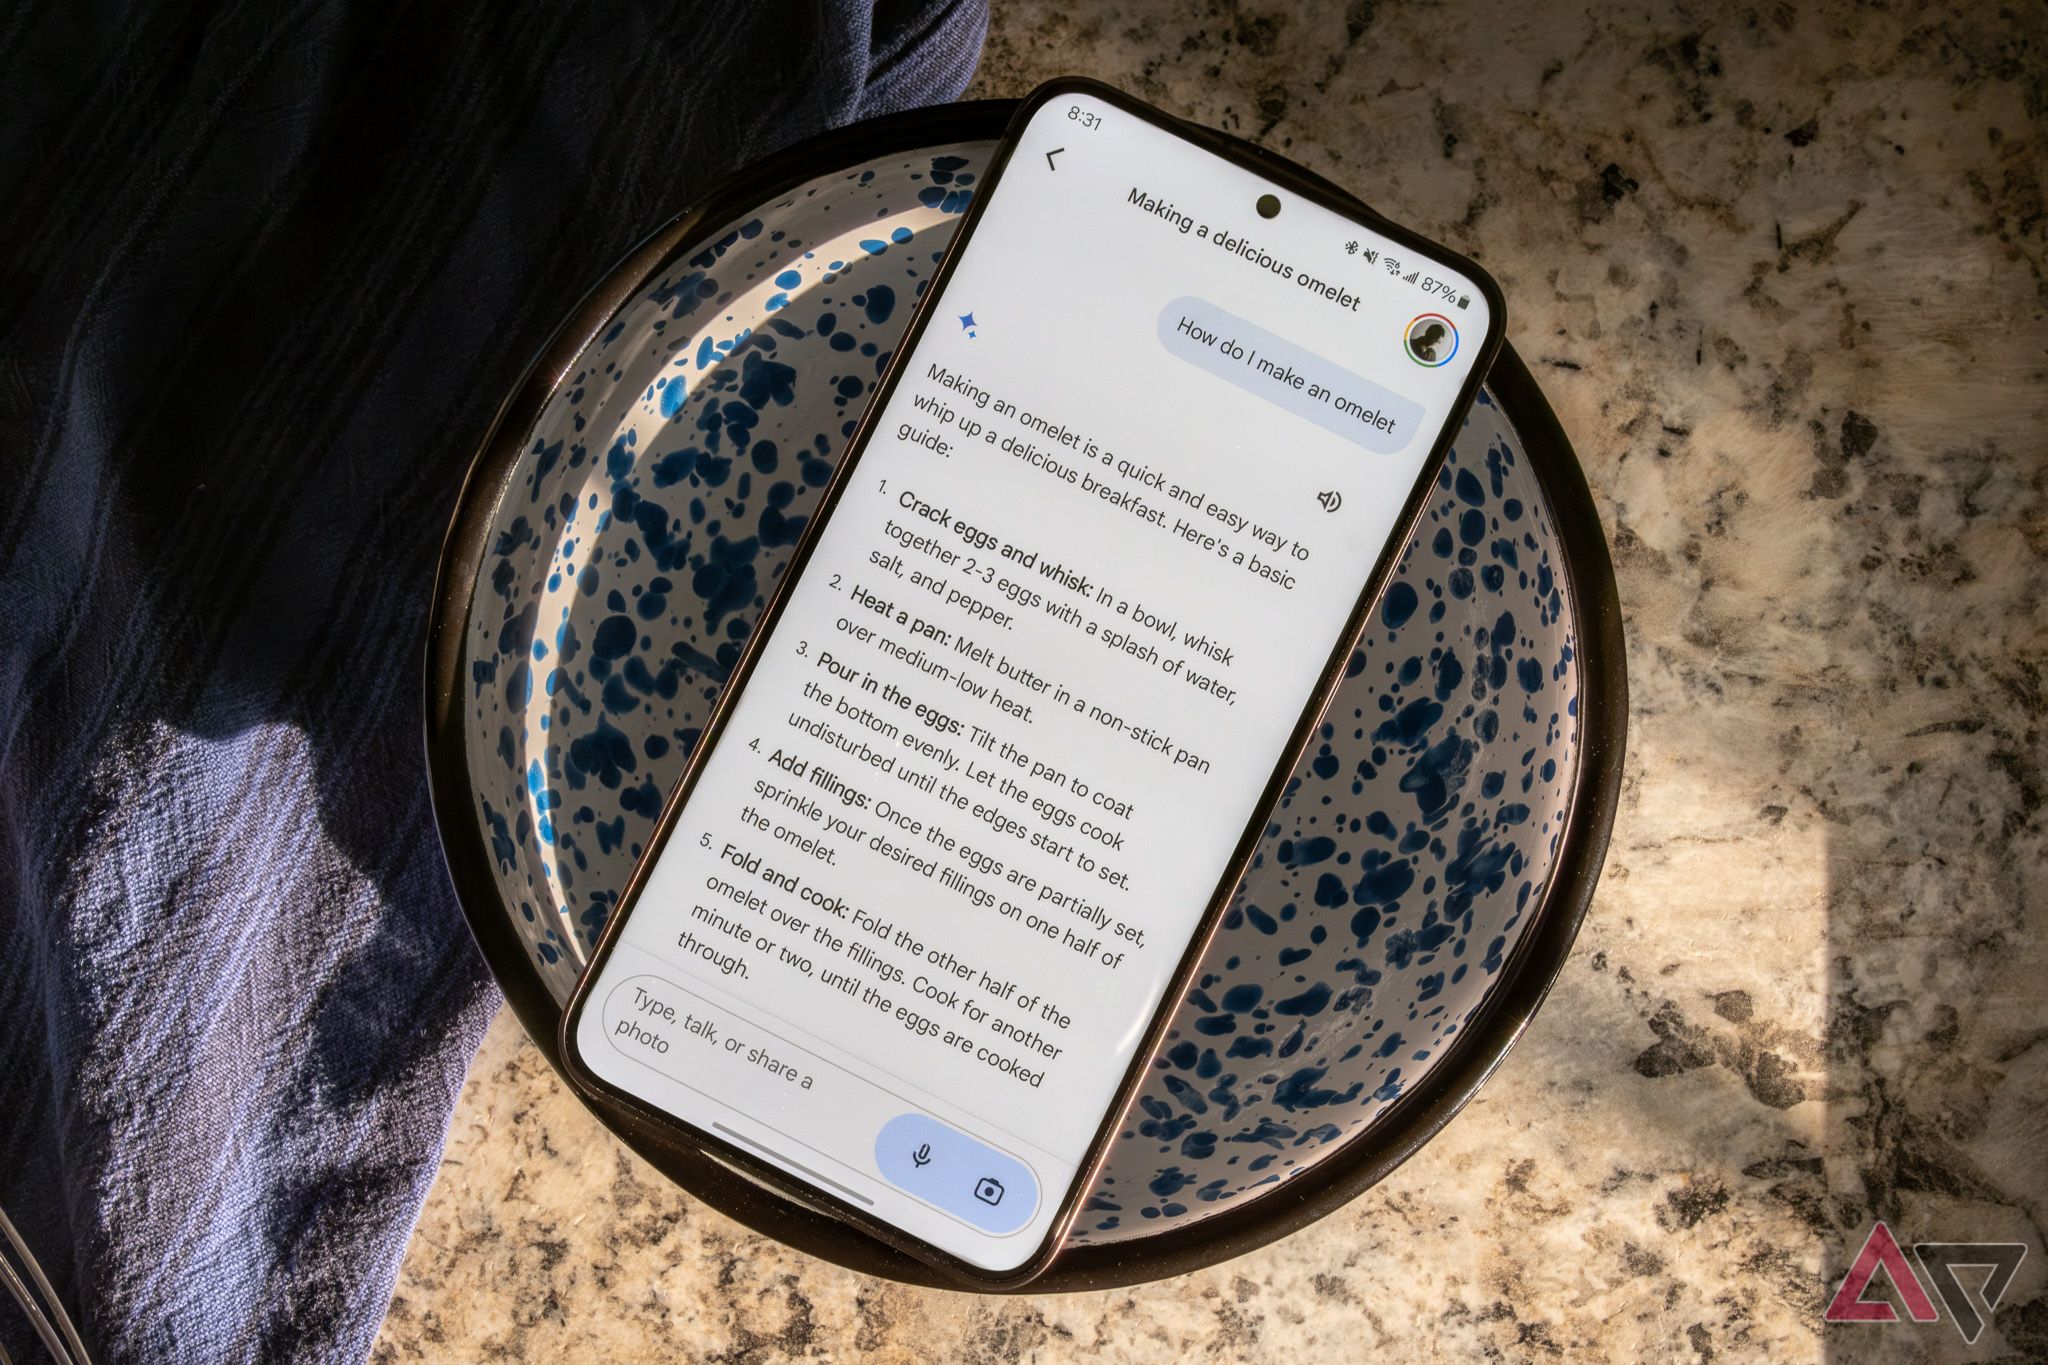 A Samsung smartphone sitting on a mixing bowl, showing a recipe for an omelette in Google Gemini